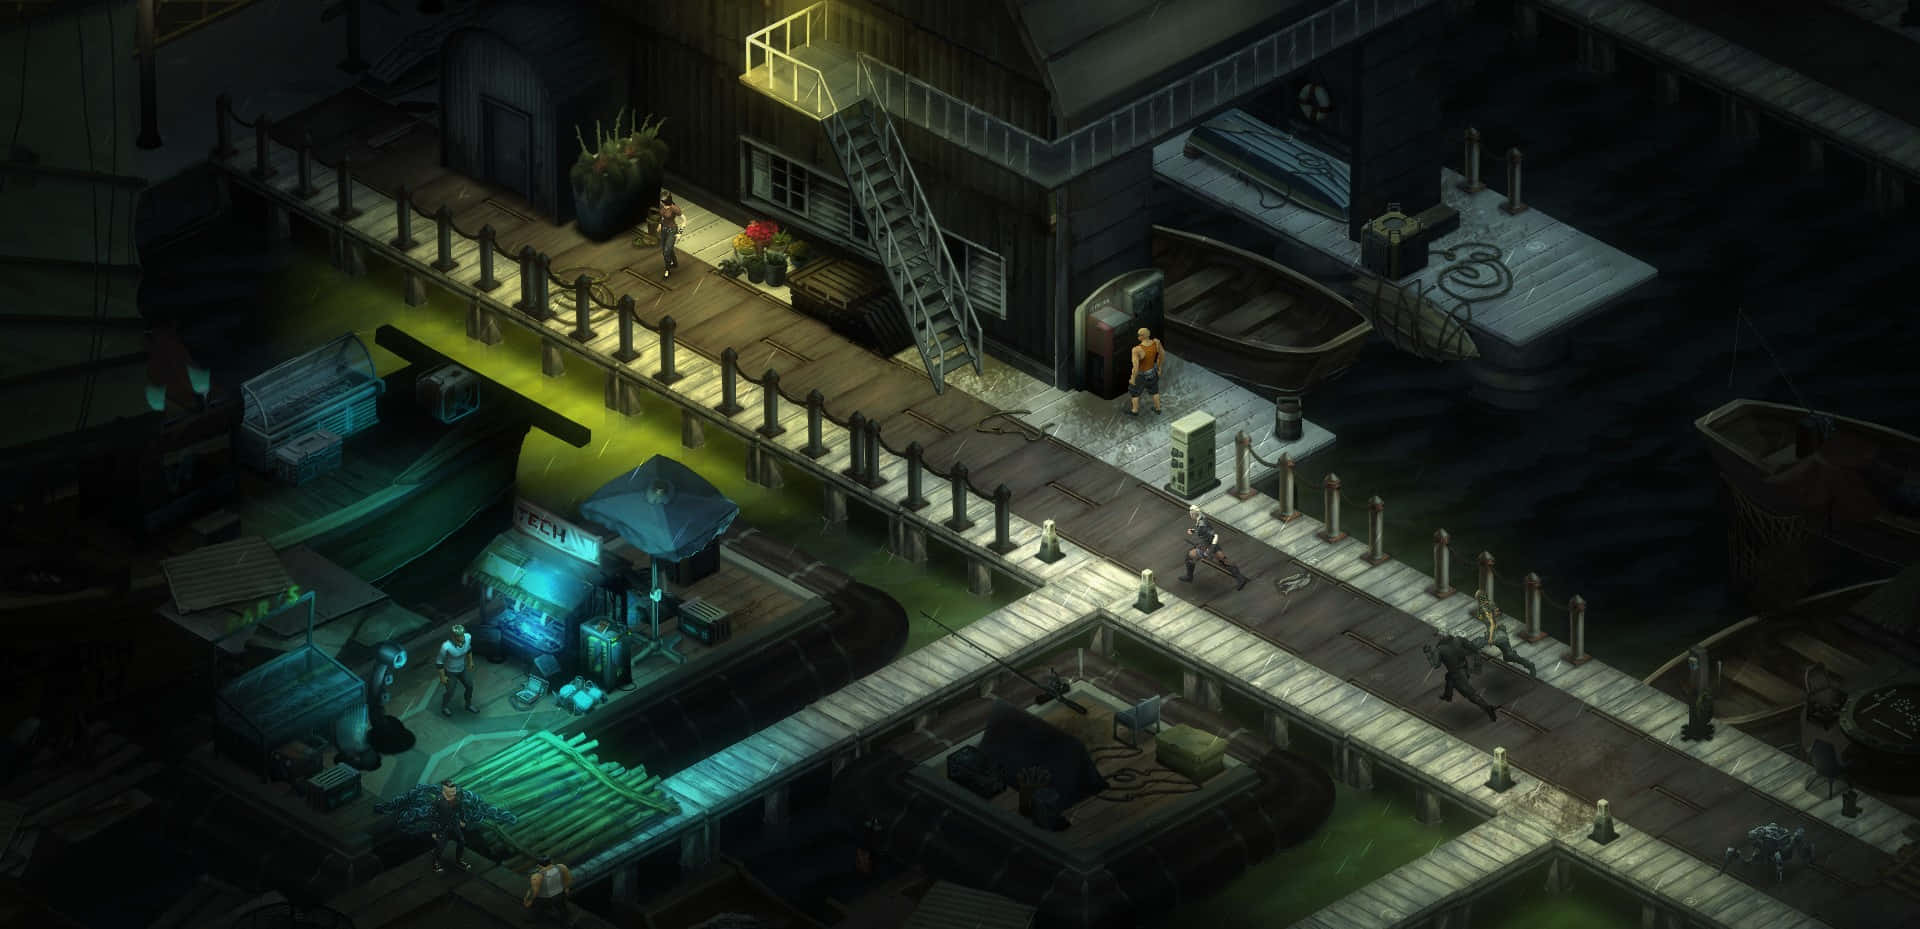 Shadowrun is a cyberpunk/fantasy role-playing game set in a dystopian future. Wallpaper